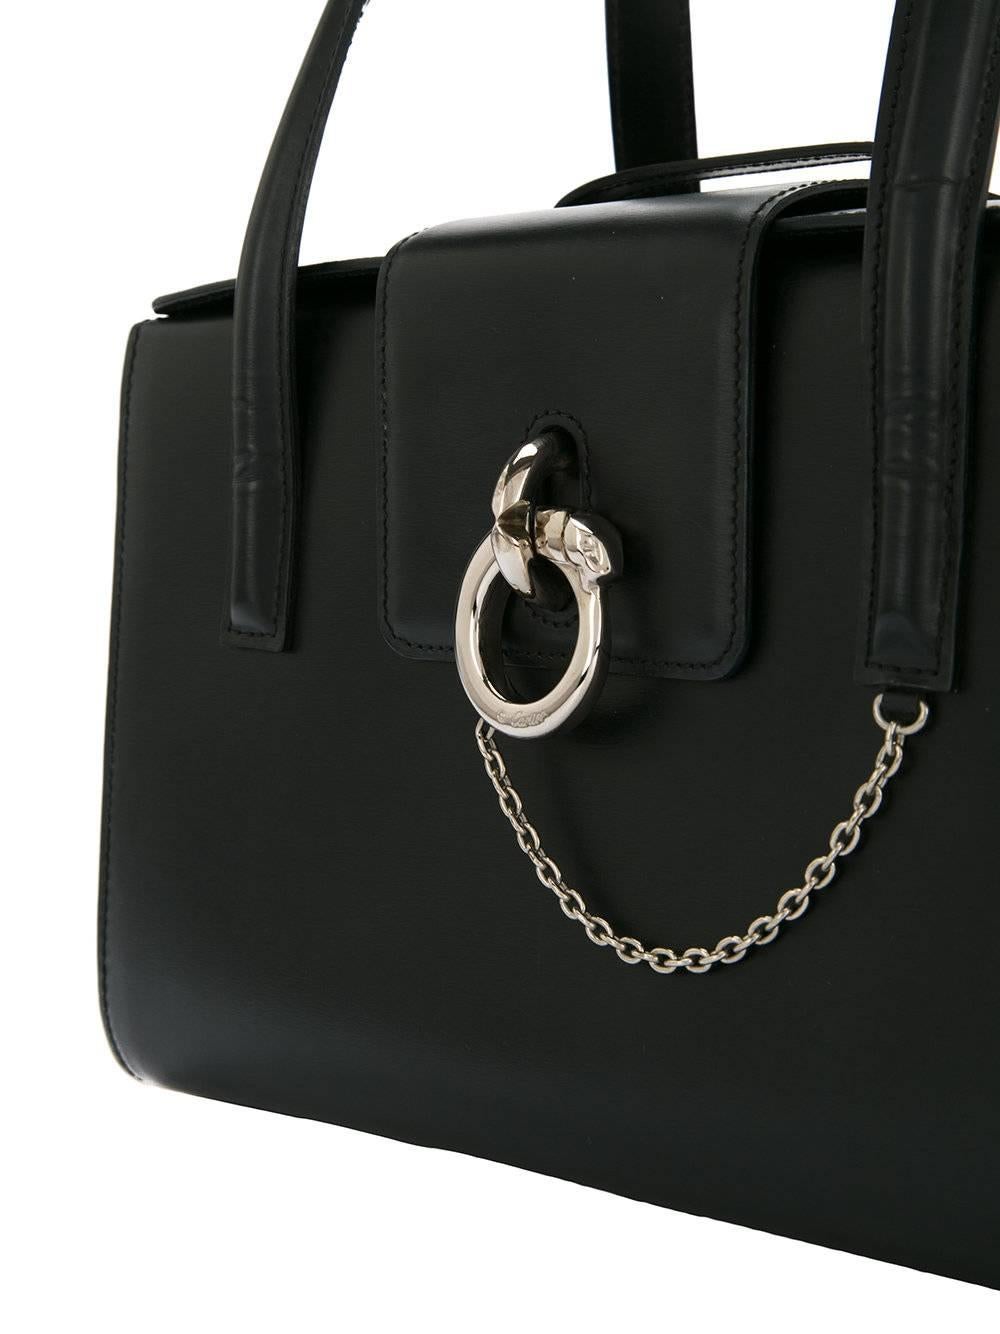 black bag with silver chain